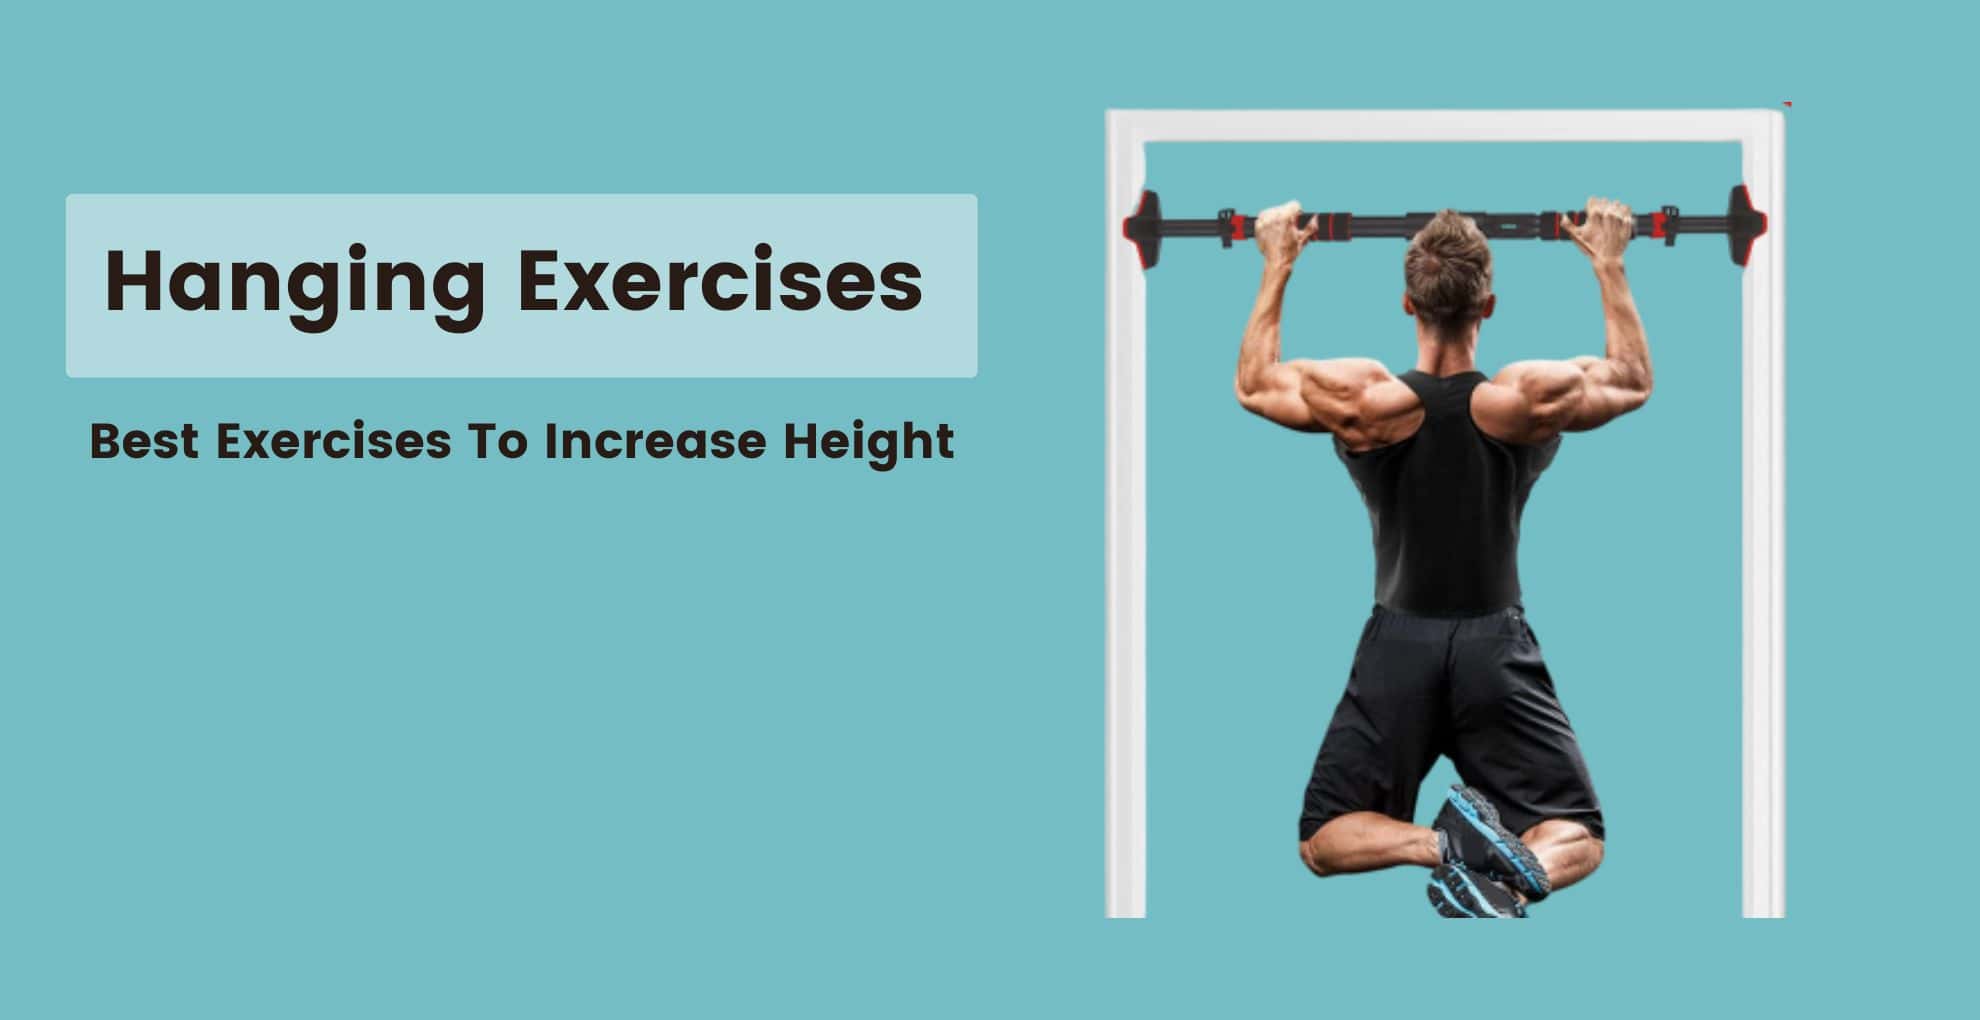 Length and Height exercise